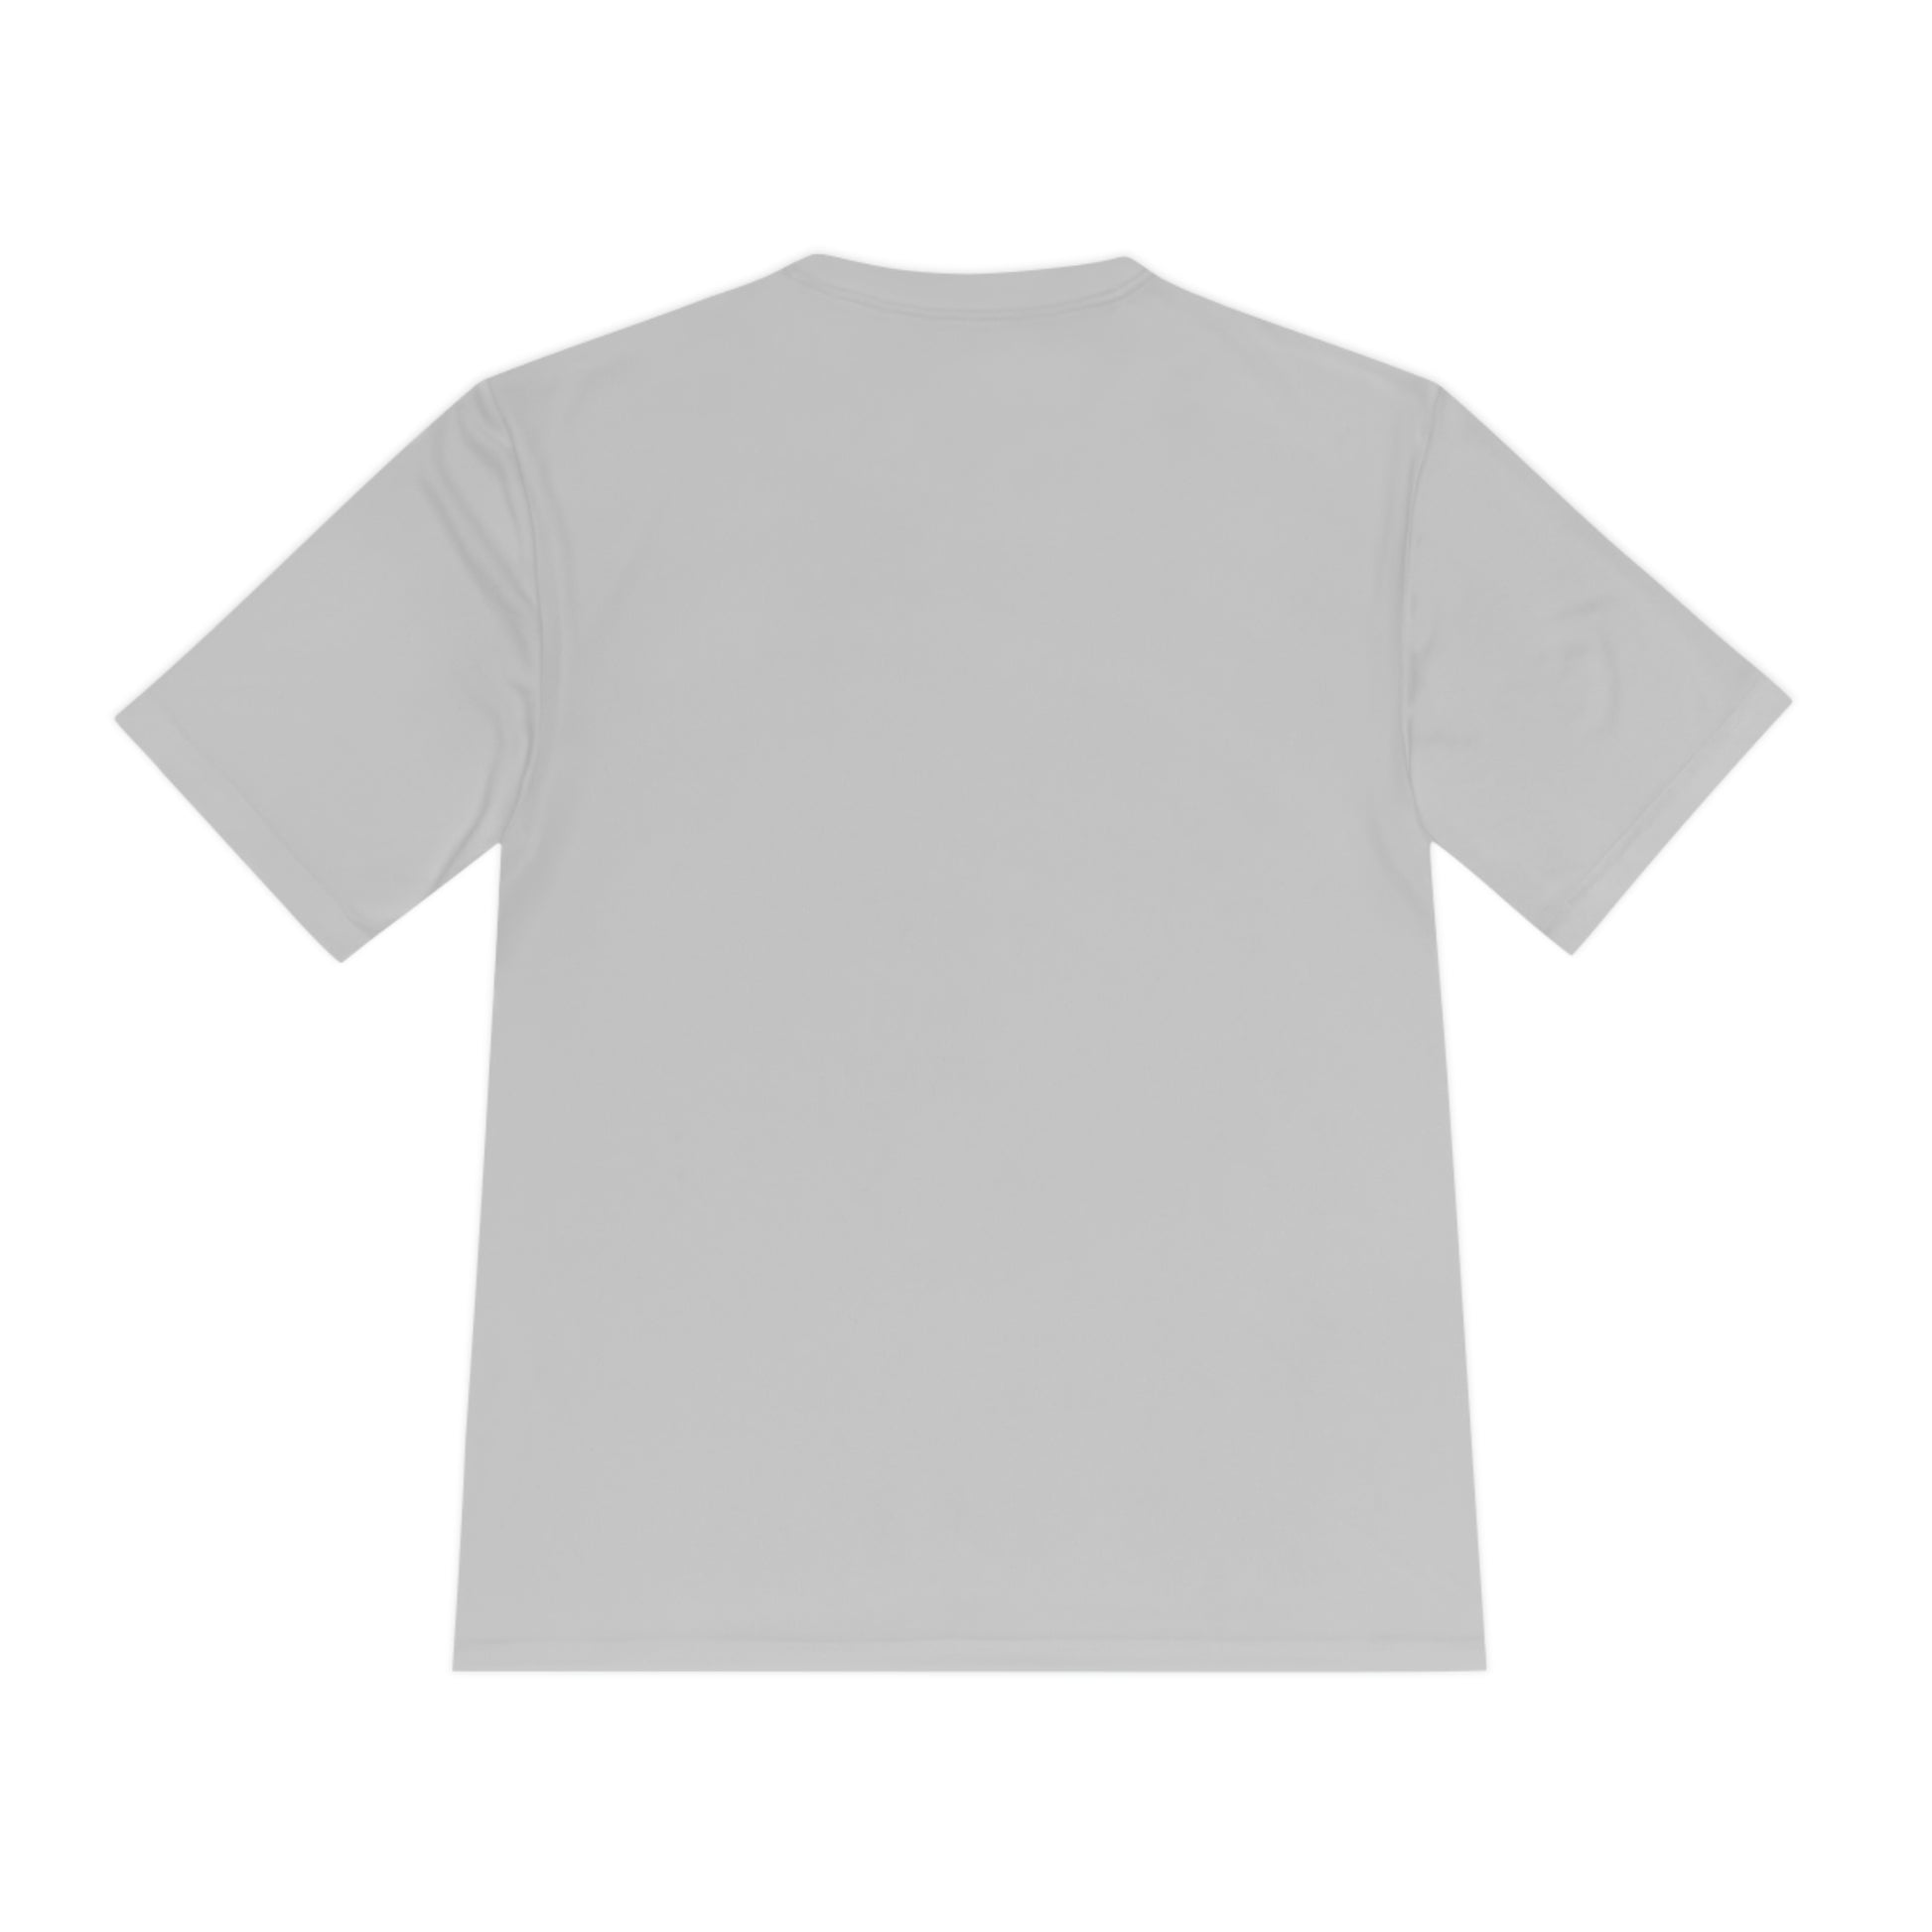 Flat back view of the Silver t-shirt